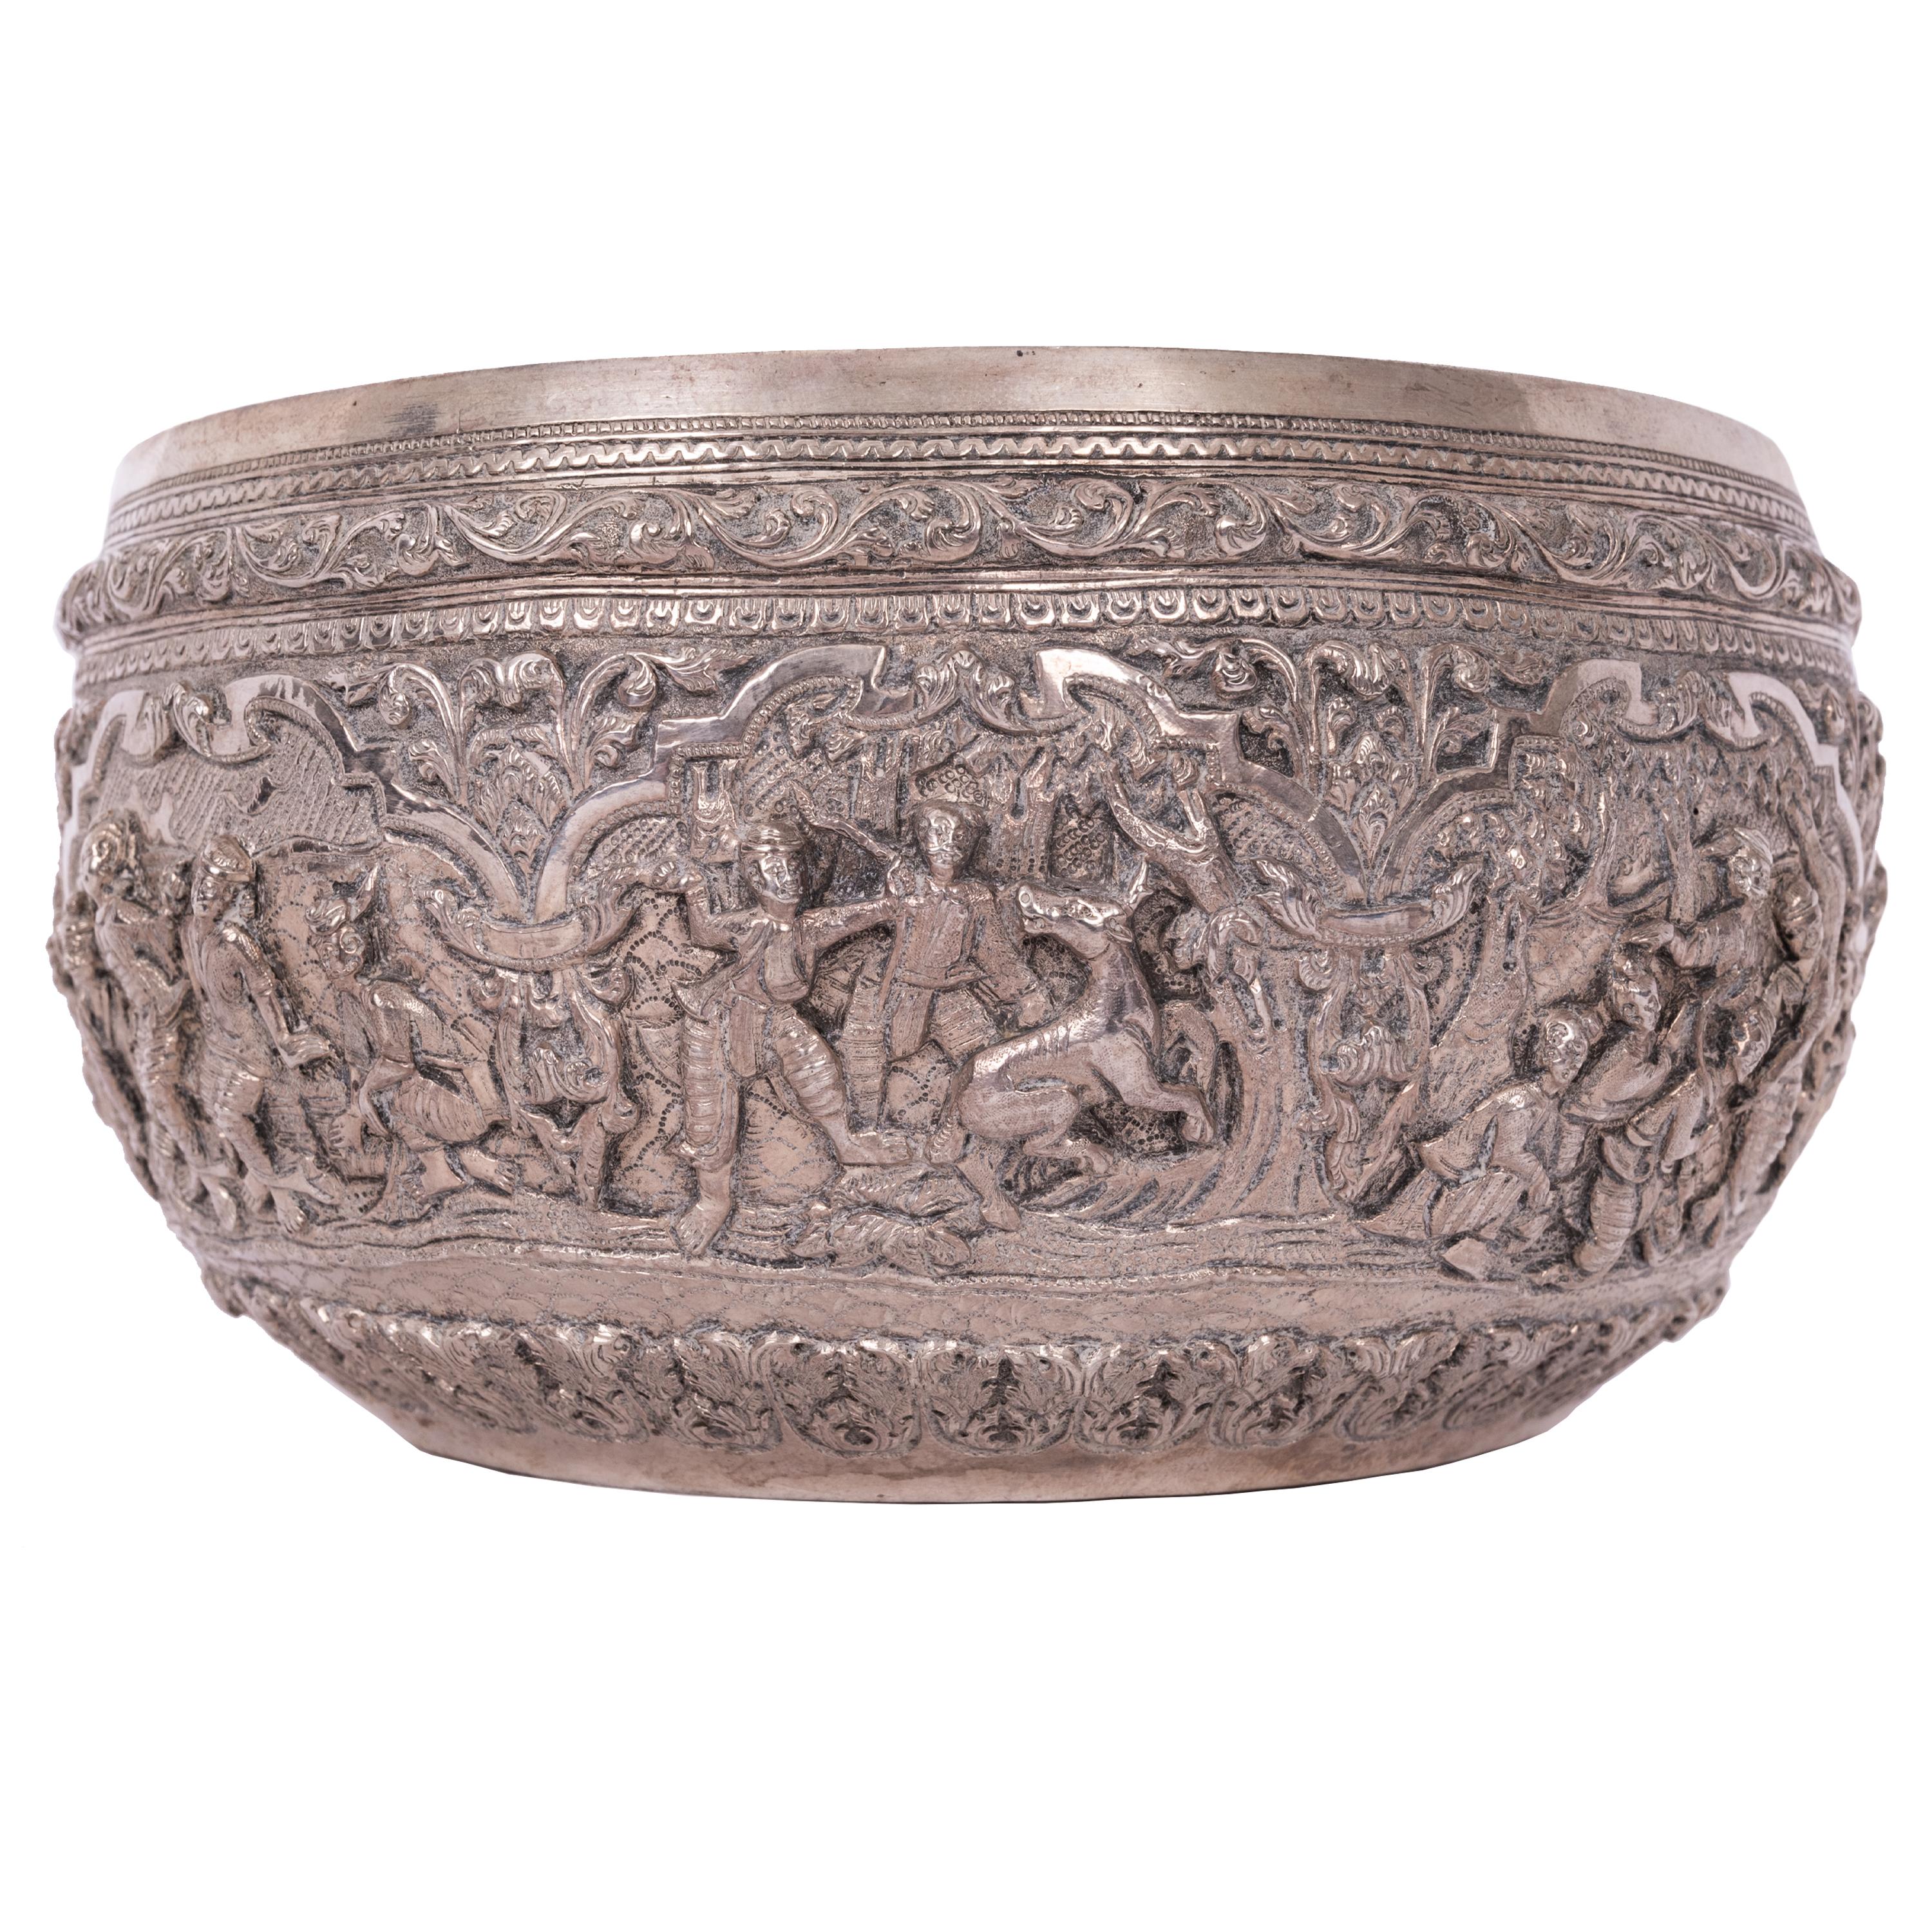 A very good Burmese (Myanmar) silver repousse work Thabeik offering bowl, circa 1890.
The bowl atributed to Maung Yin Maung, with an engraved guanyin figure to the base, pre-dating the 